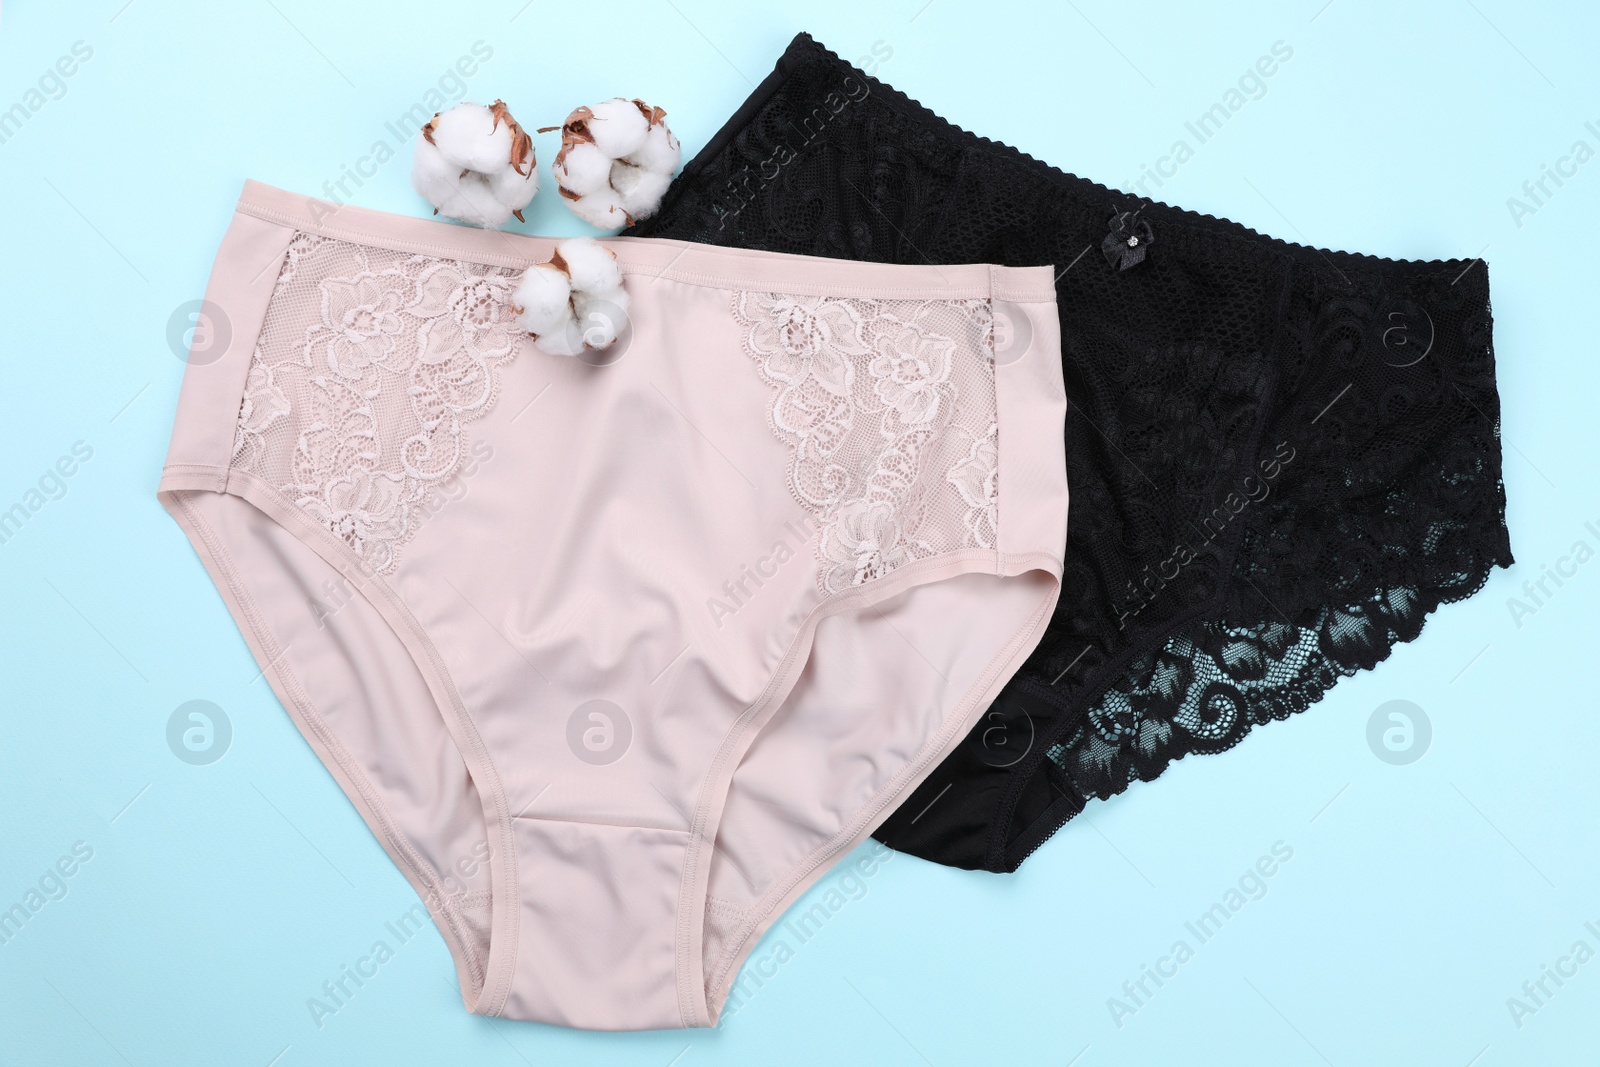 Photo of Elegant plus size women's underwear and fluffy cotton flowers on light blue background, flat lay